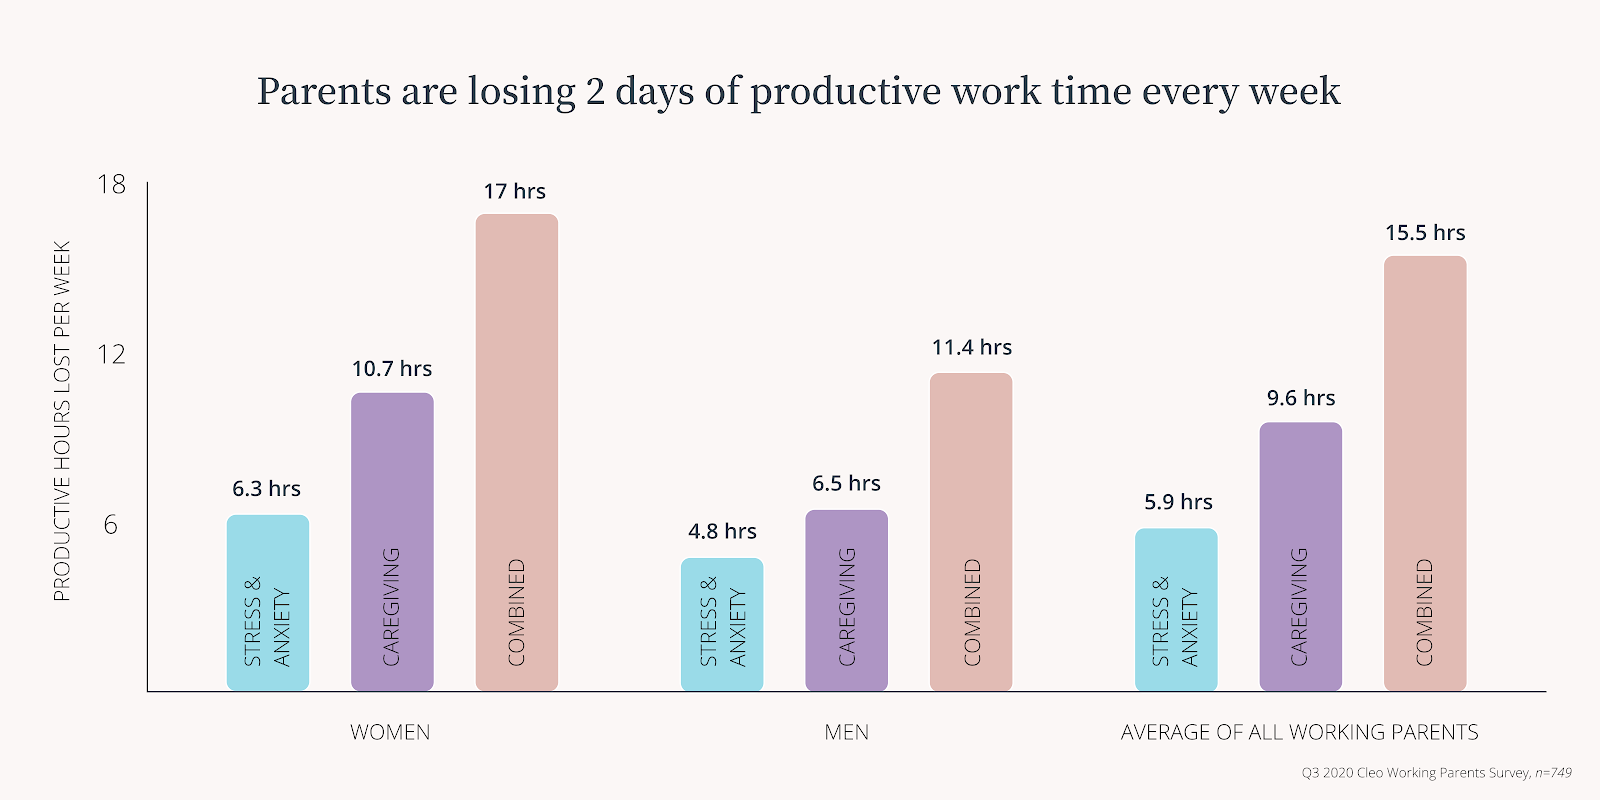 Hours of weekly productive work time lost by working parents